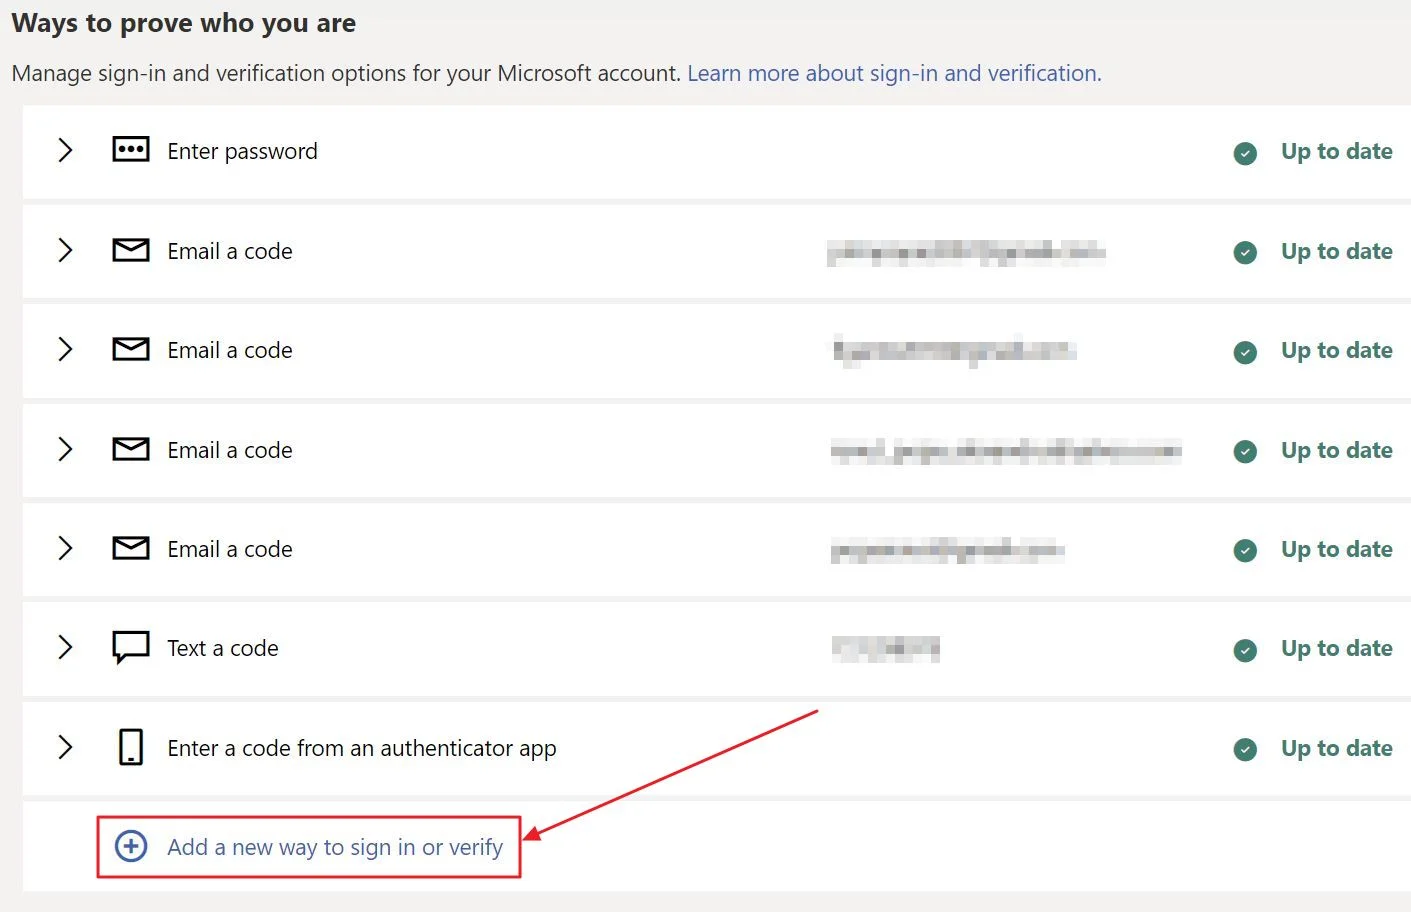 microsoft account ways to prove who you are